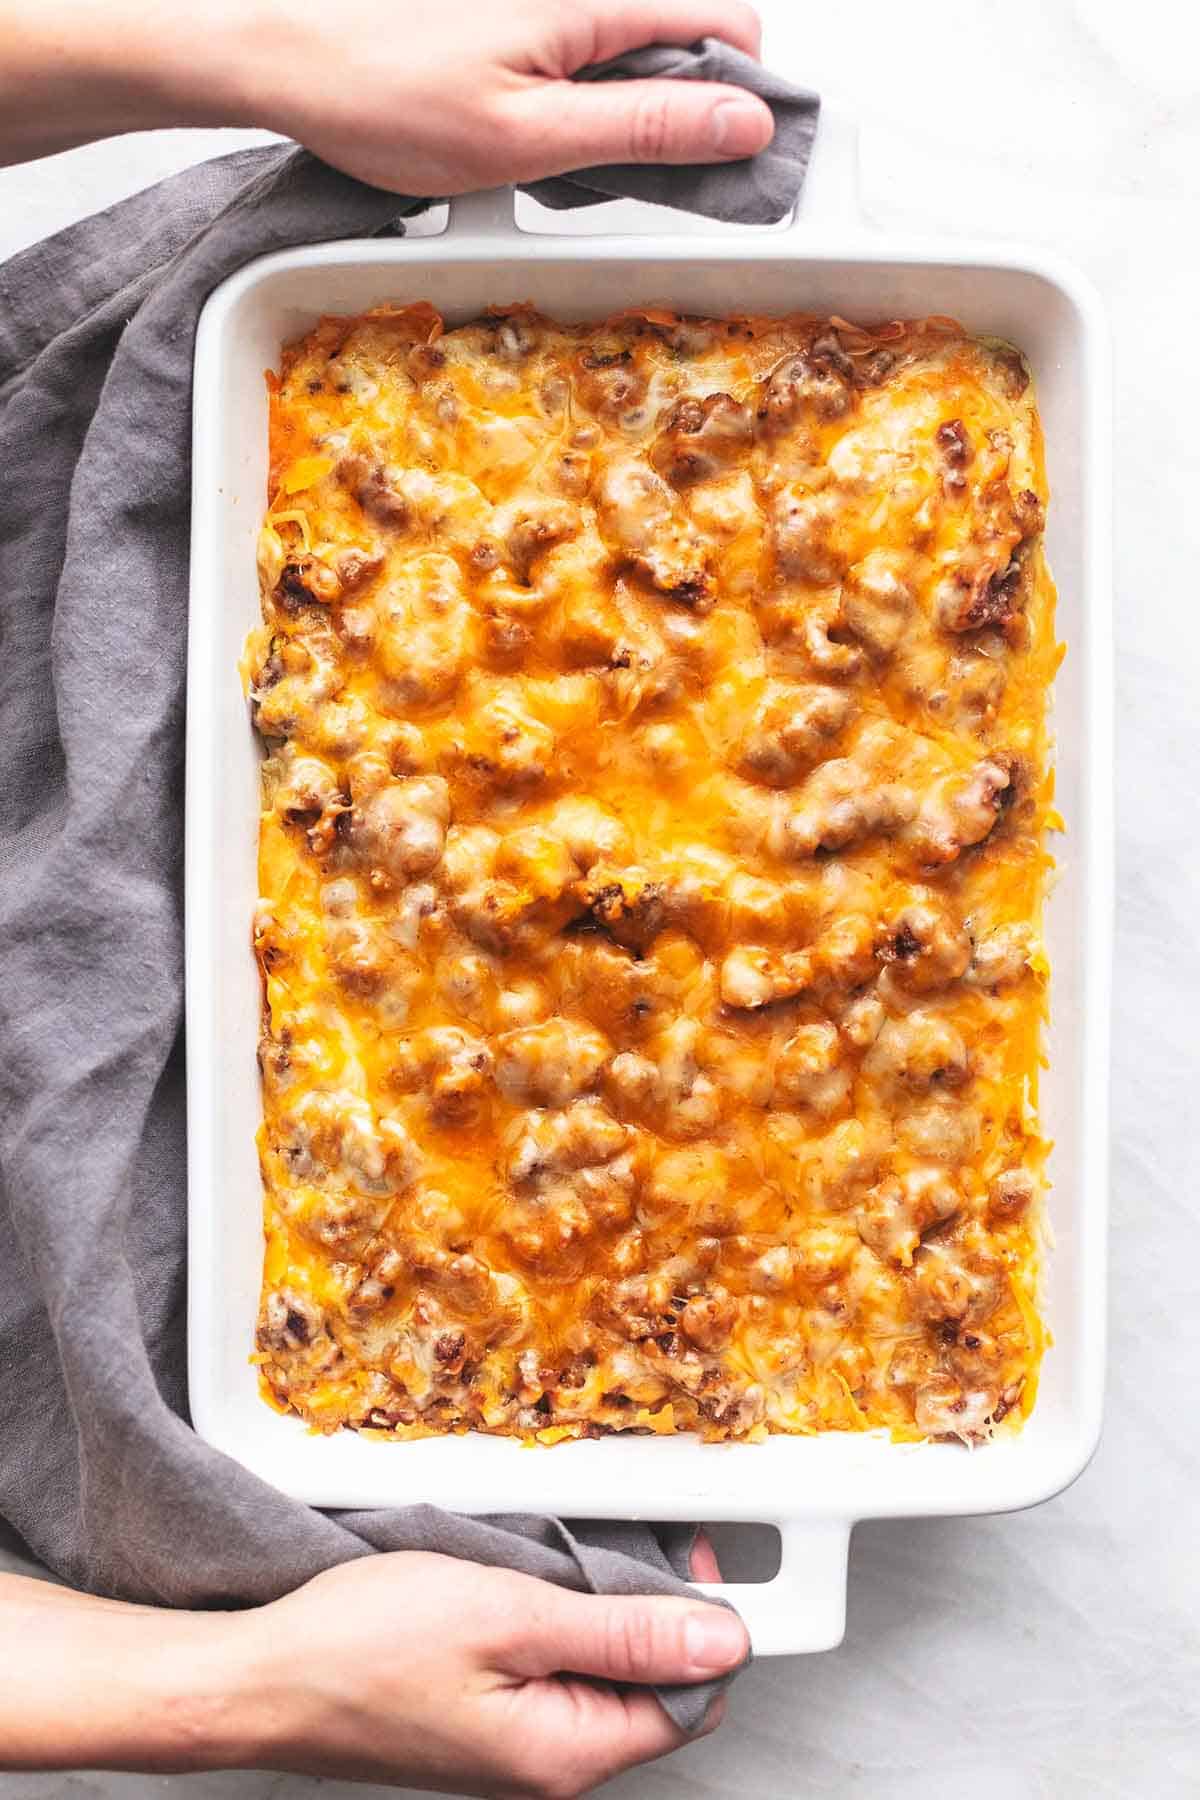 top view of hands holding a baking dish of sausage breakfast casserole.